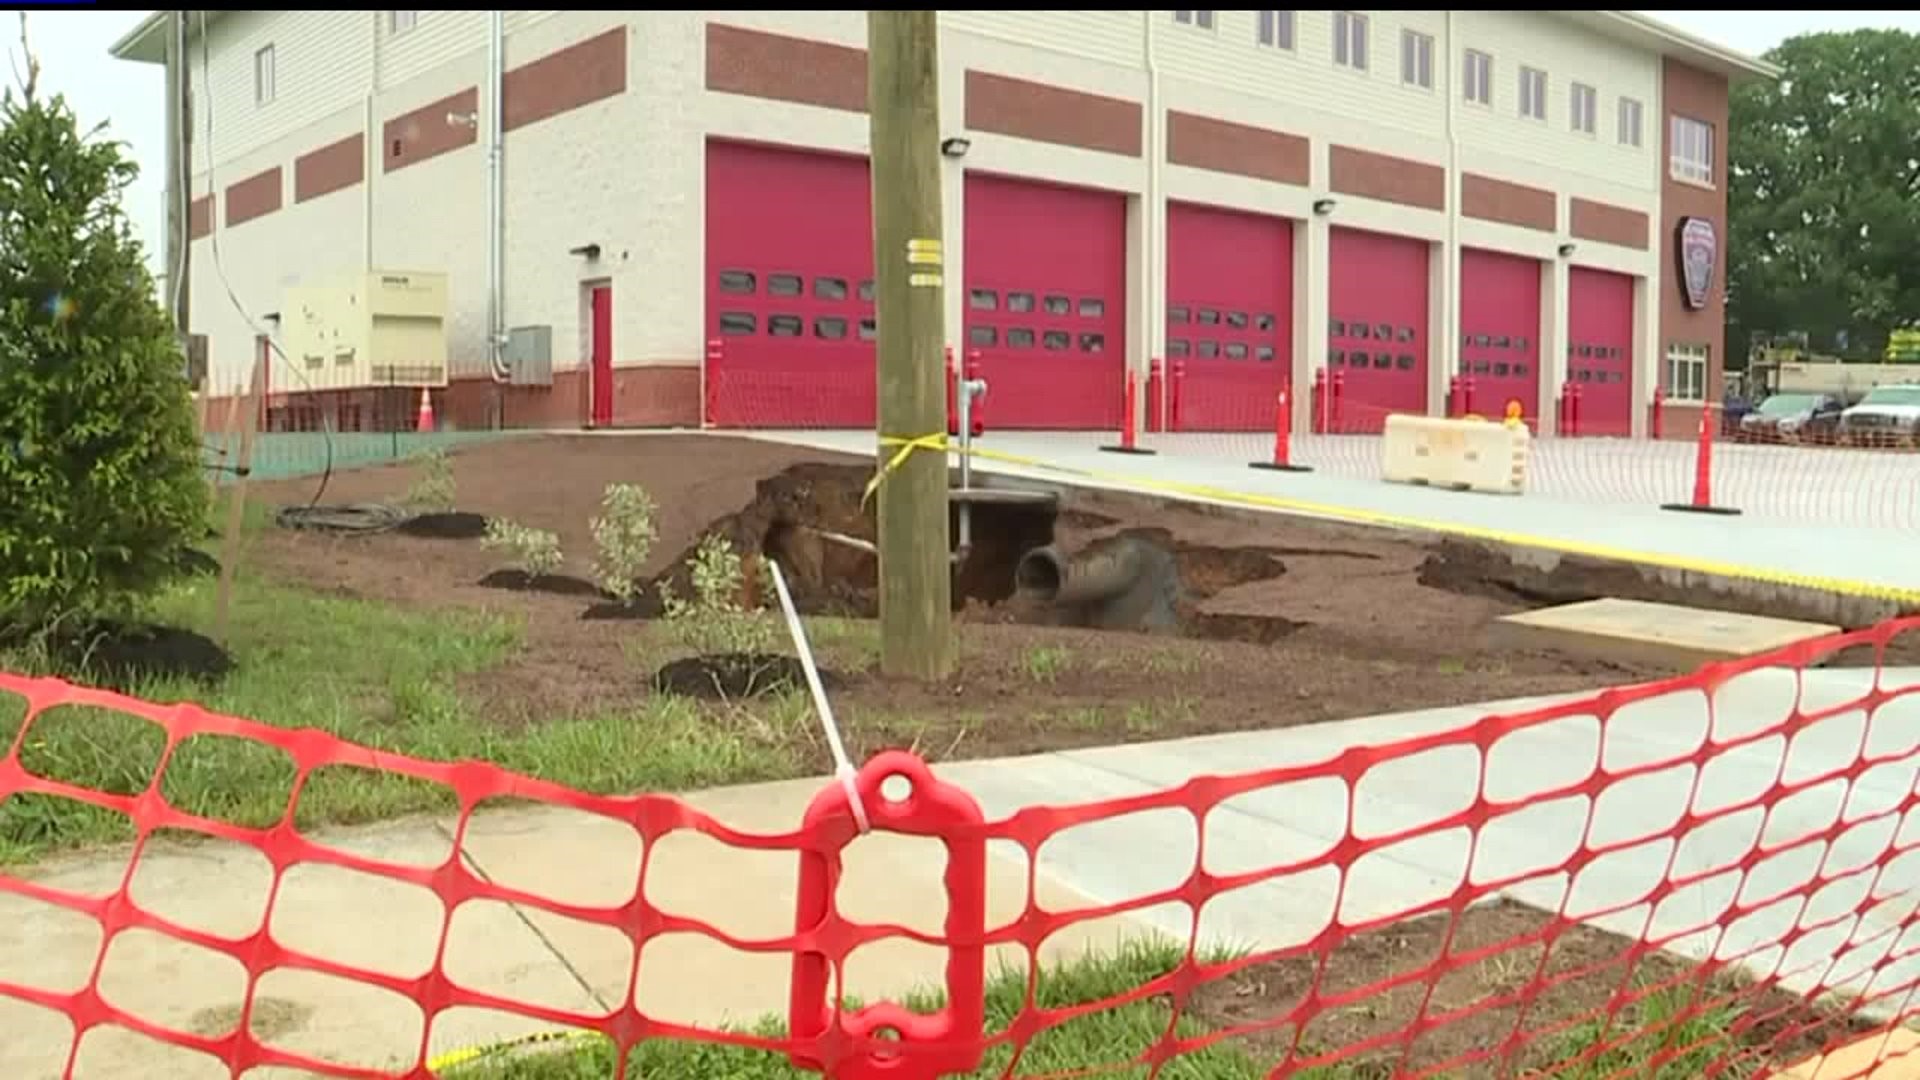 Sinkhole at new Palmyra fire house brings bad memories for neighbors